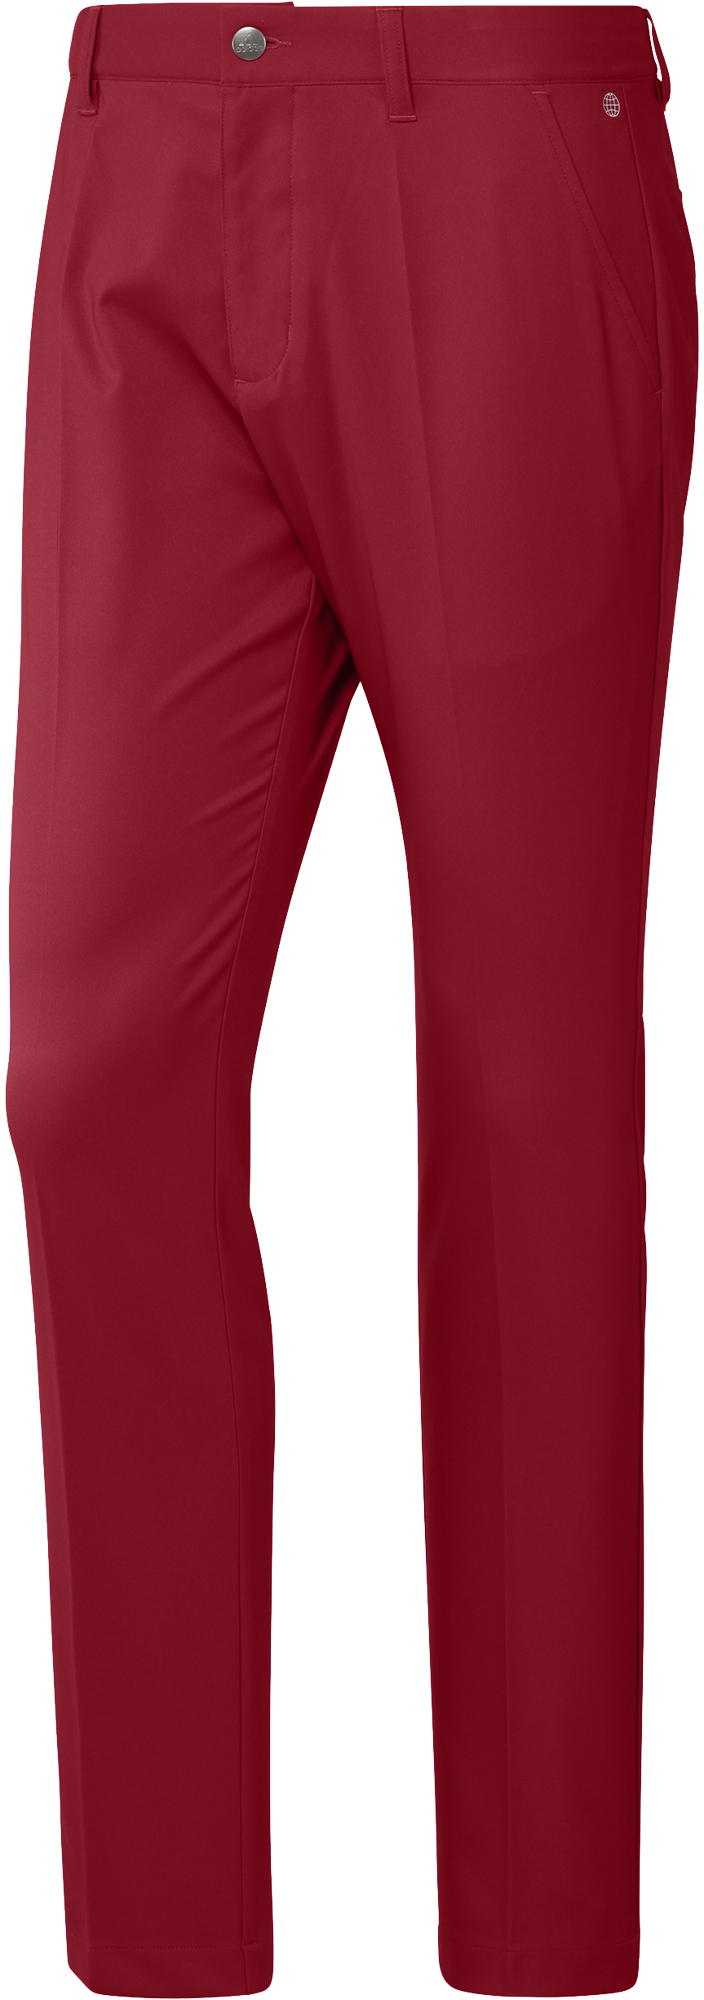 adidas Ultimate365 Primegreen Tapered Pant, red